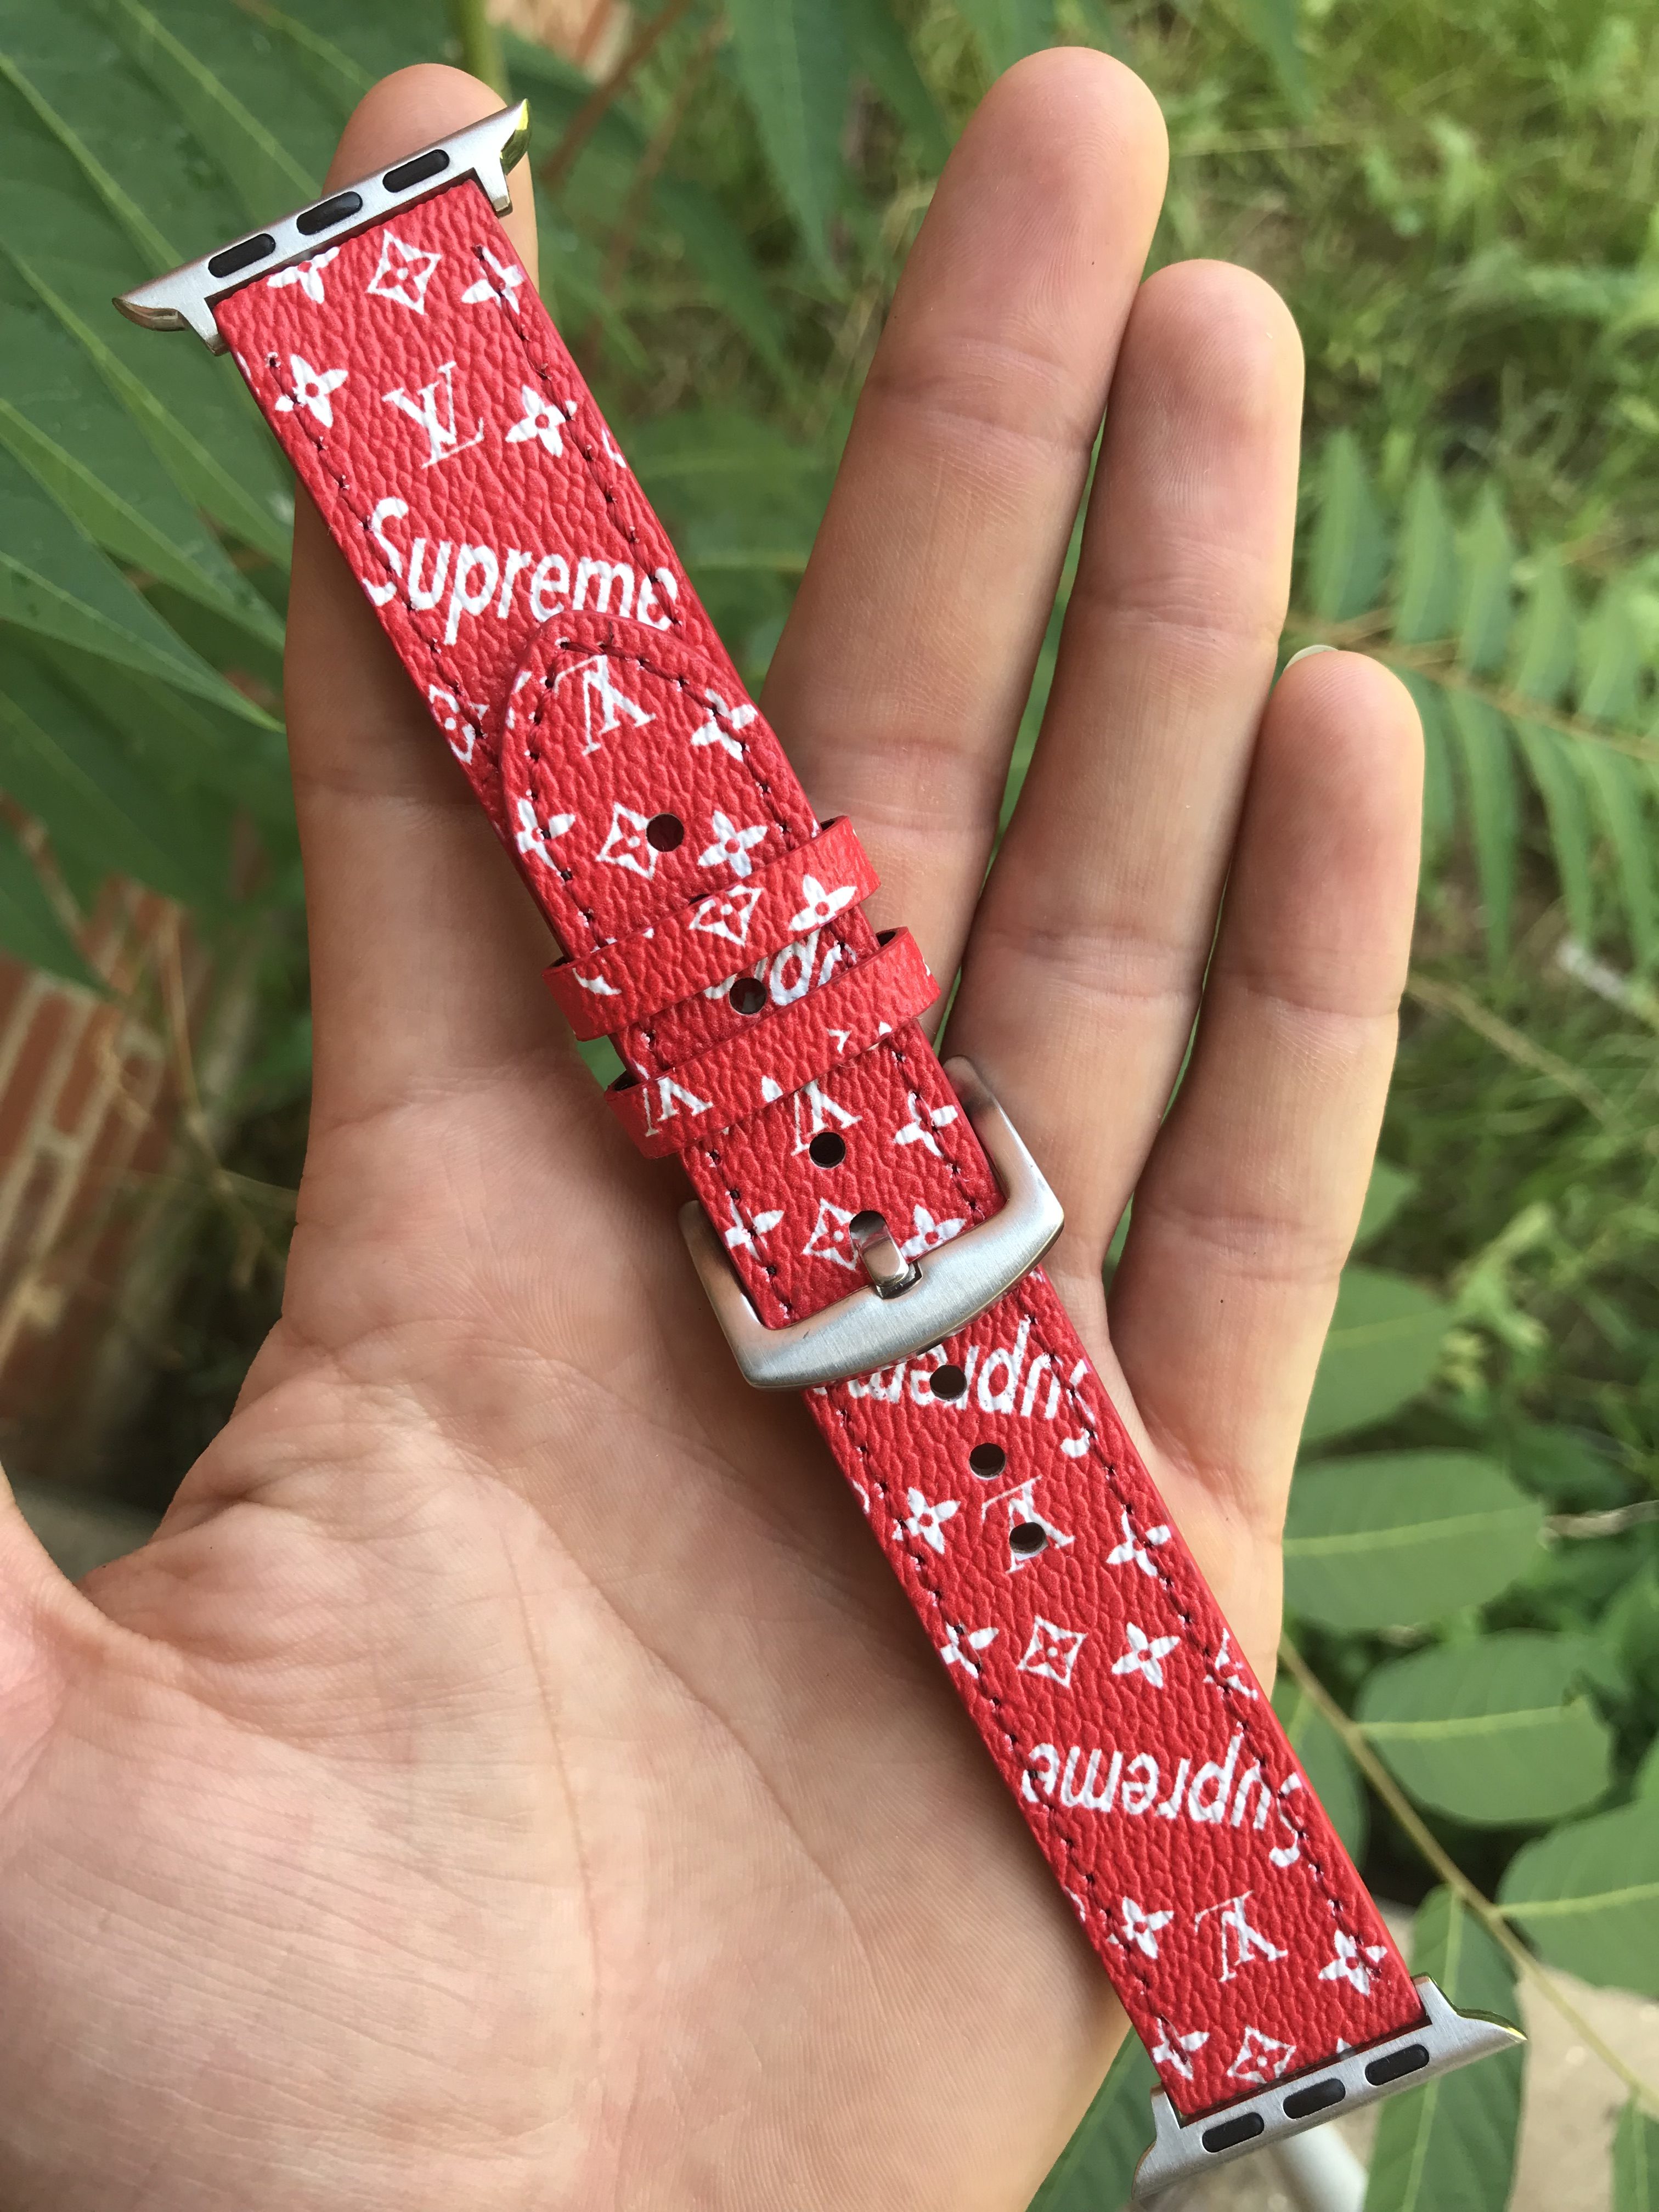 Louis Vuitton x Supreme Apple Watch band handmade for Sale in